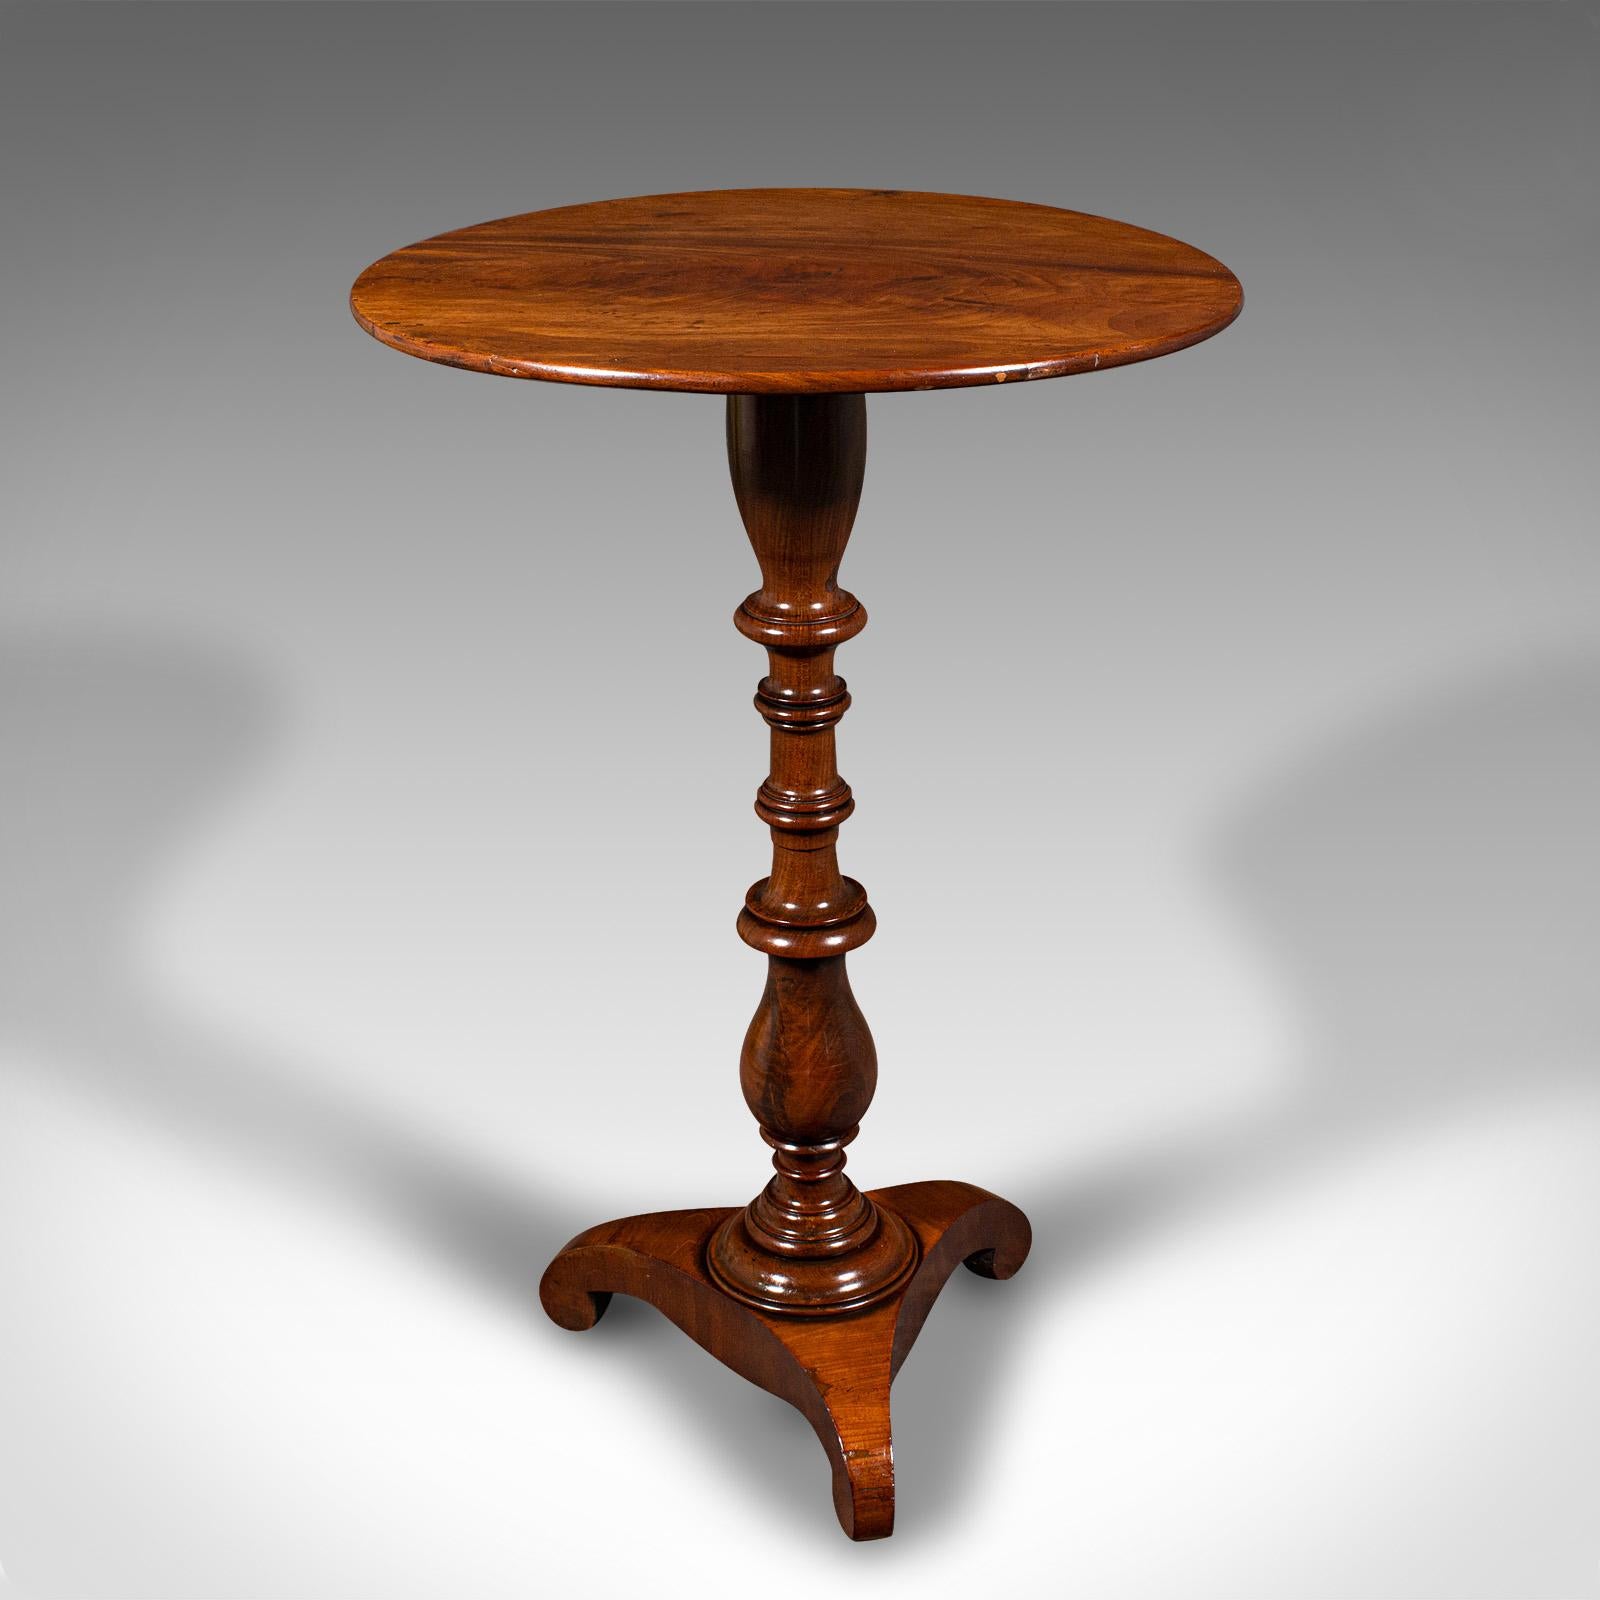 British Small Antique Lamp Table, English, Flame, Wine, Occasional, Regency, Circa 1820